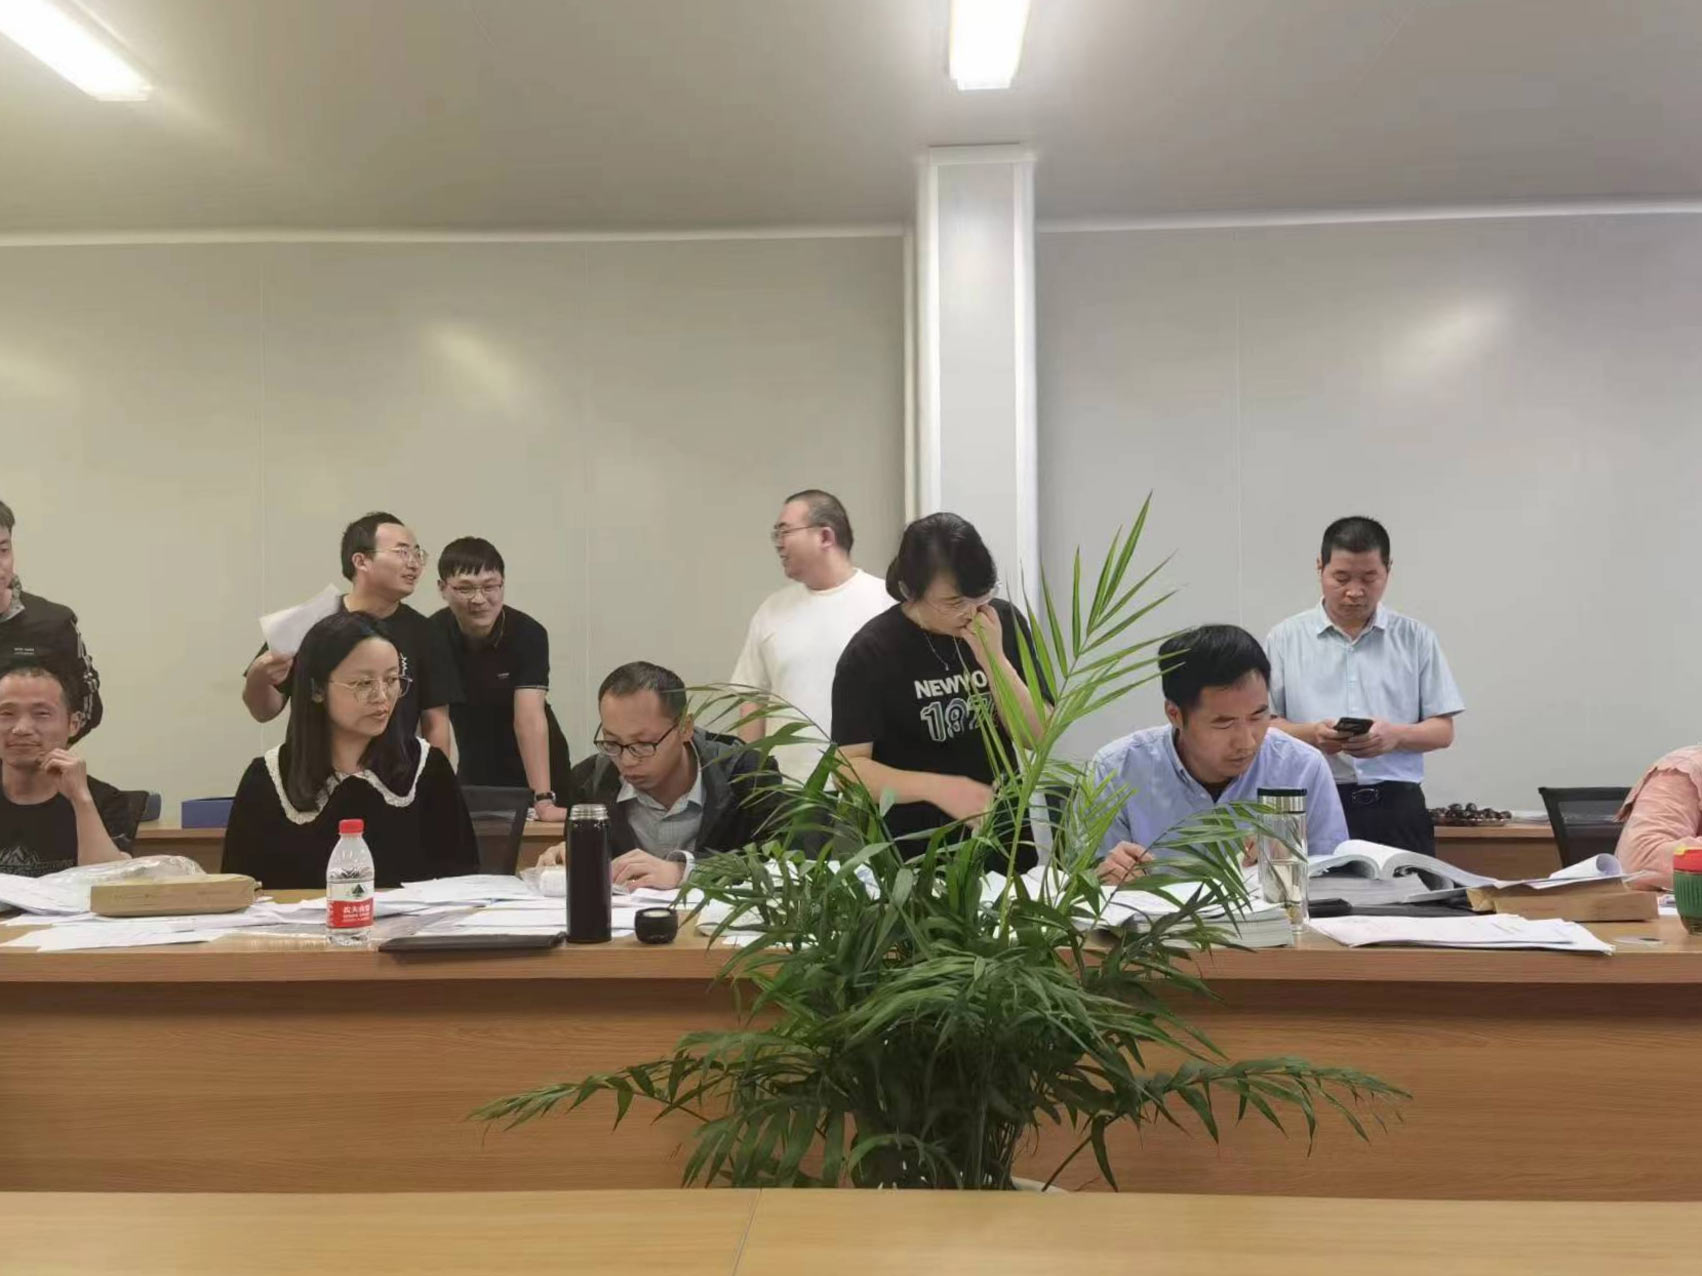 Anhui Tiankang Medical Technology Co., Ltd. successfully passed the flight inspection of Anhui Province Food and Drug Administration